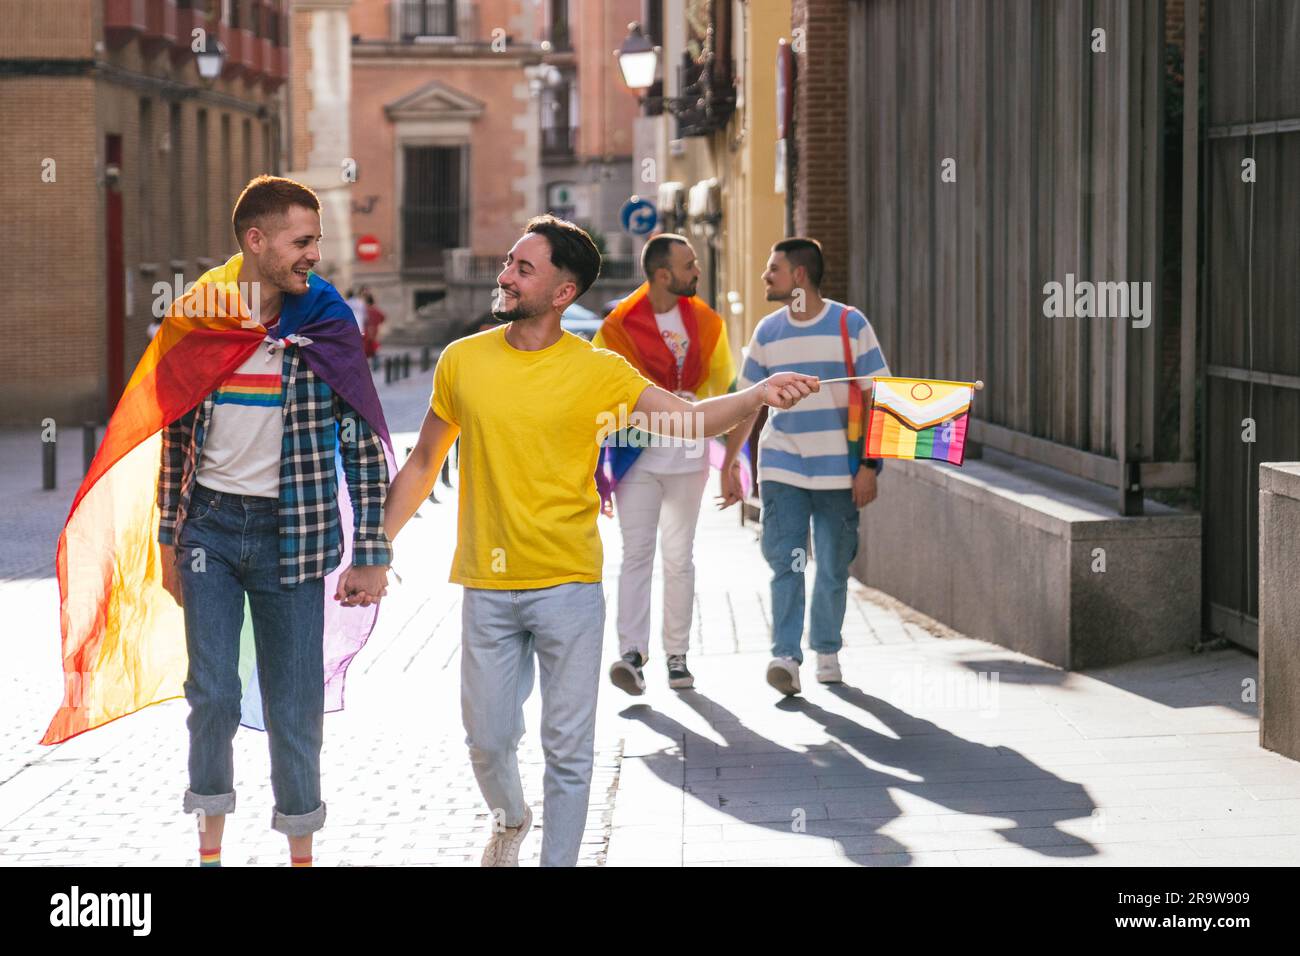 In a sun-kissed city, two gay couples radiate pure happiness, proudly adorned with LGBT symbols while holding hands, immersed in a lively sunset walk. Stock Photo